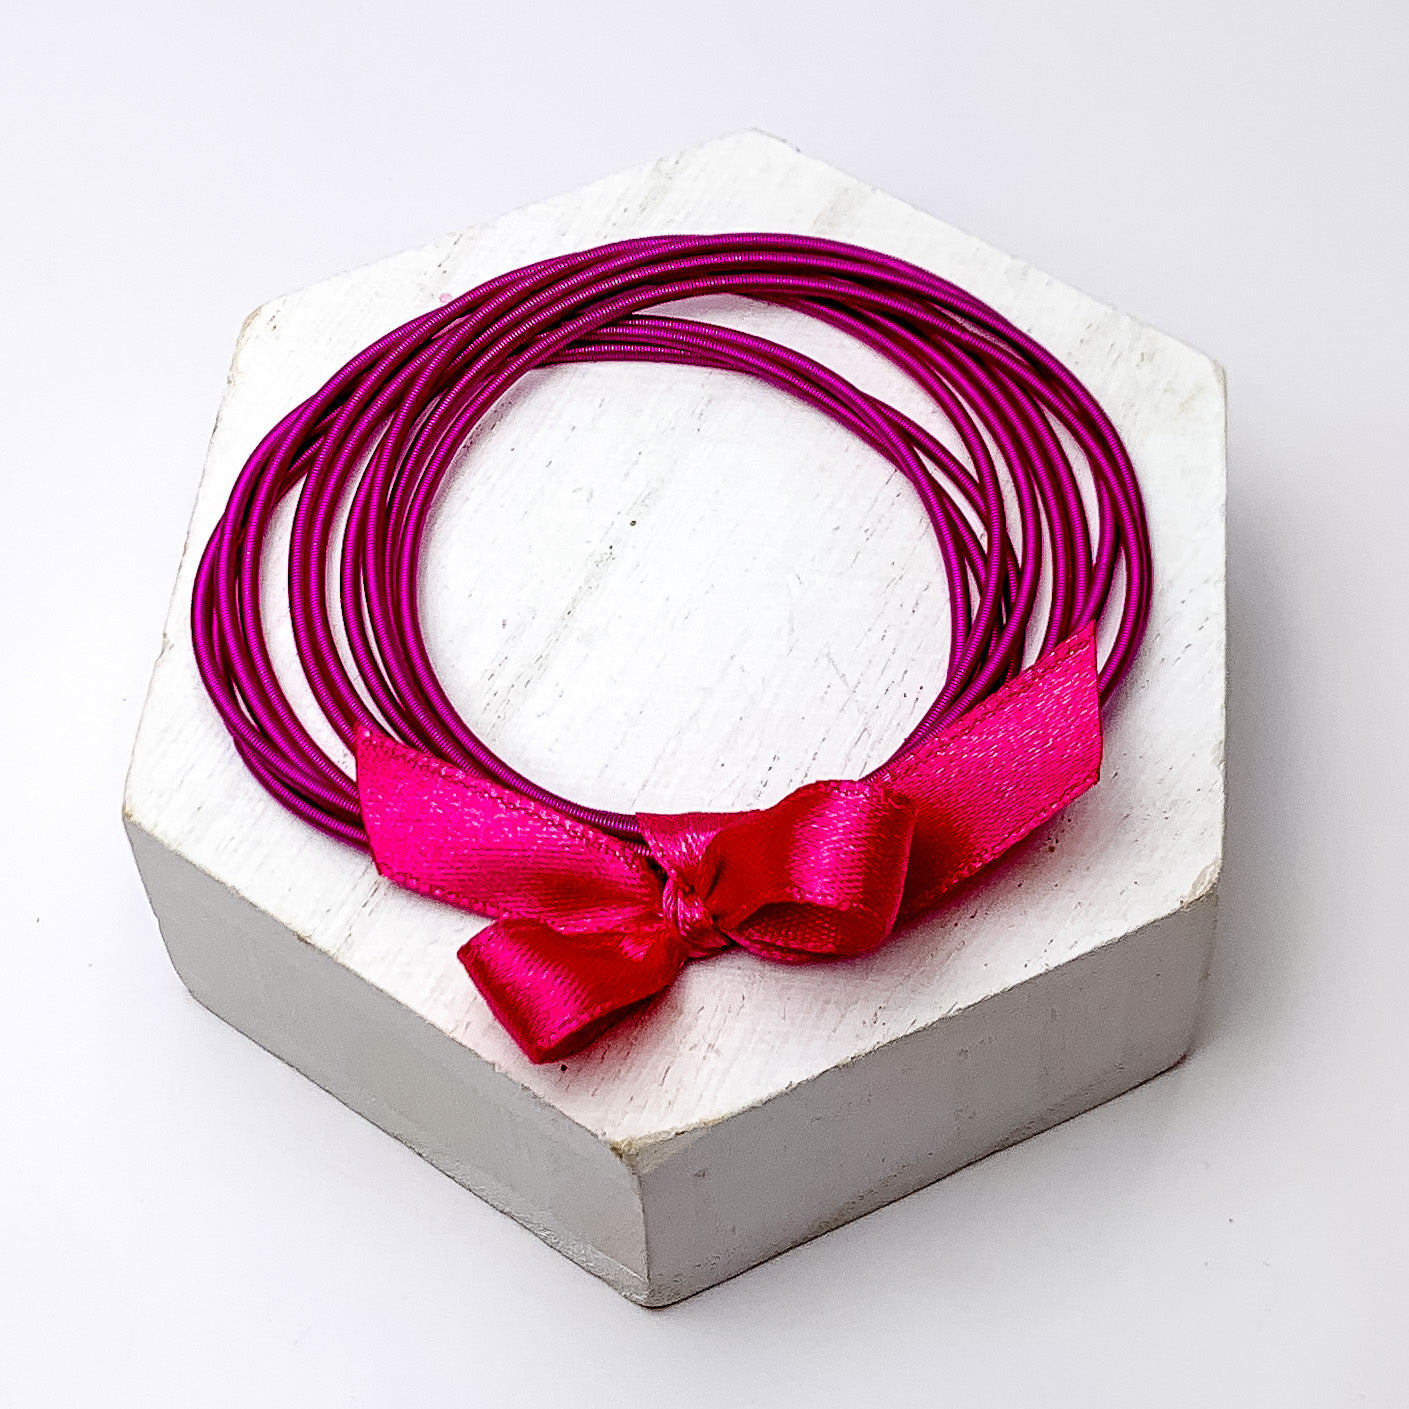 Guitar String Bracelets with Bow in Fuchsia. Pictured on a white background sitting on top of a white block.